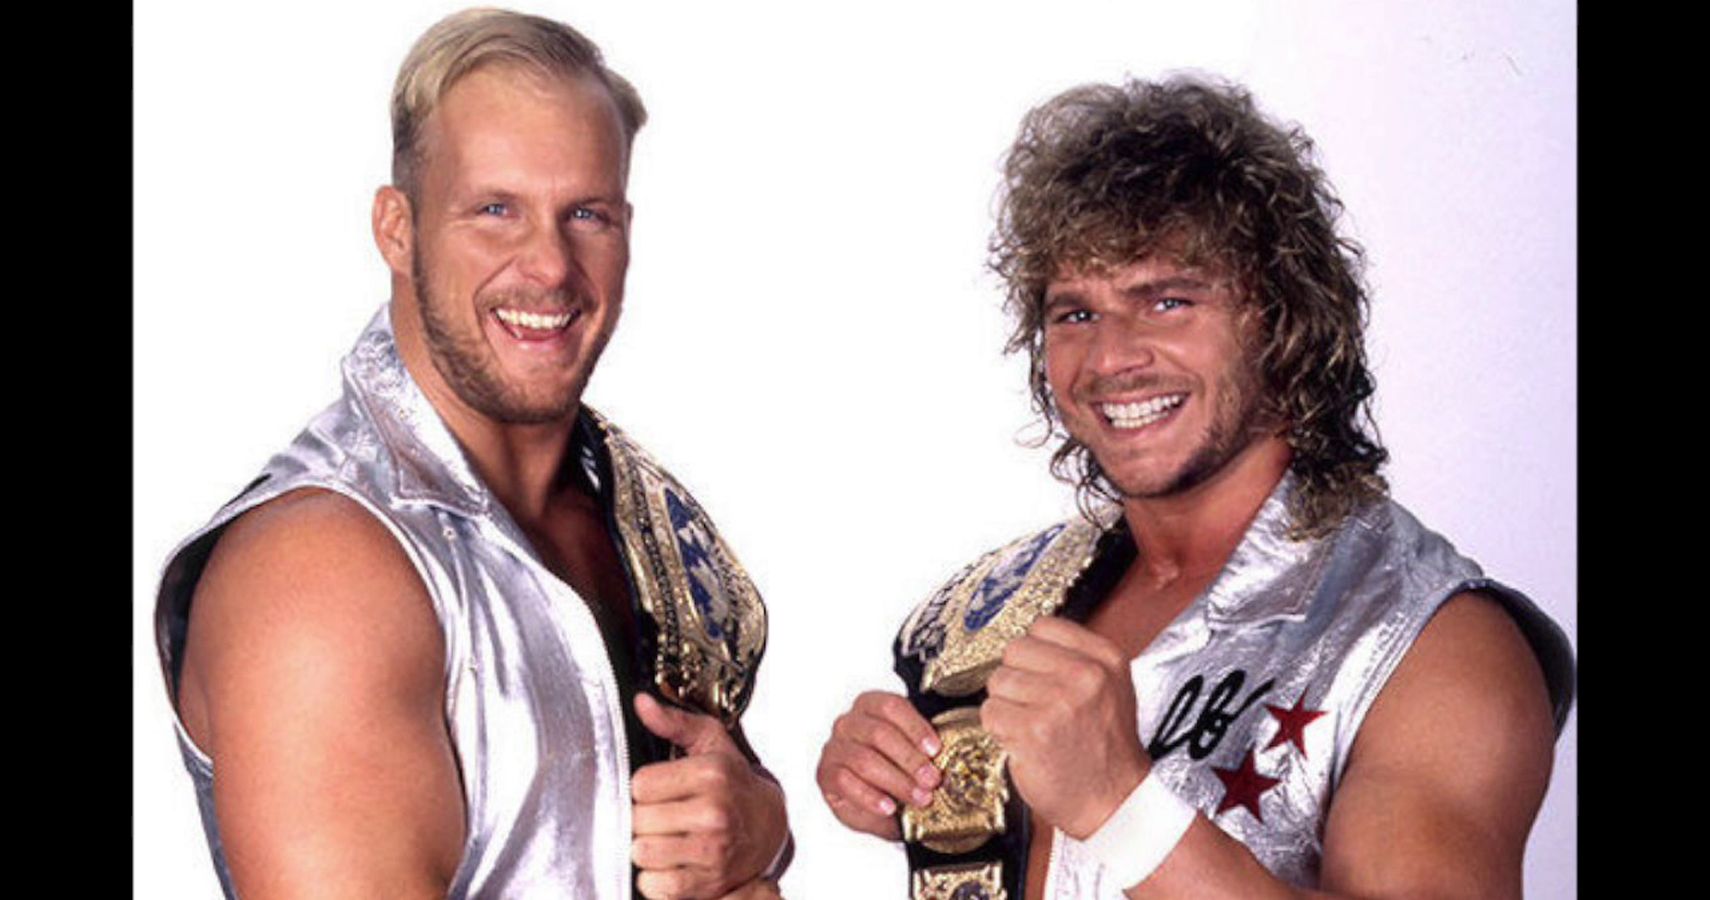 The 10 Best WCW Tag Teams to Never Win The WWE Tag Titles